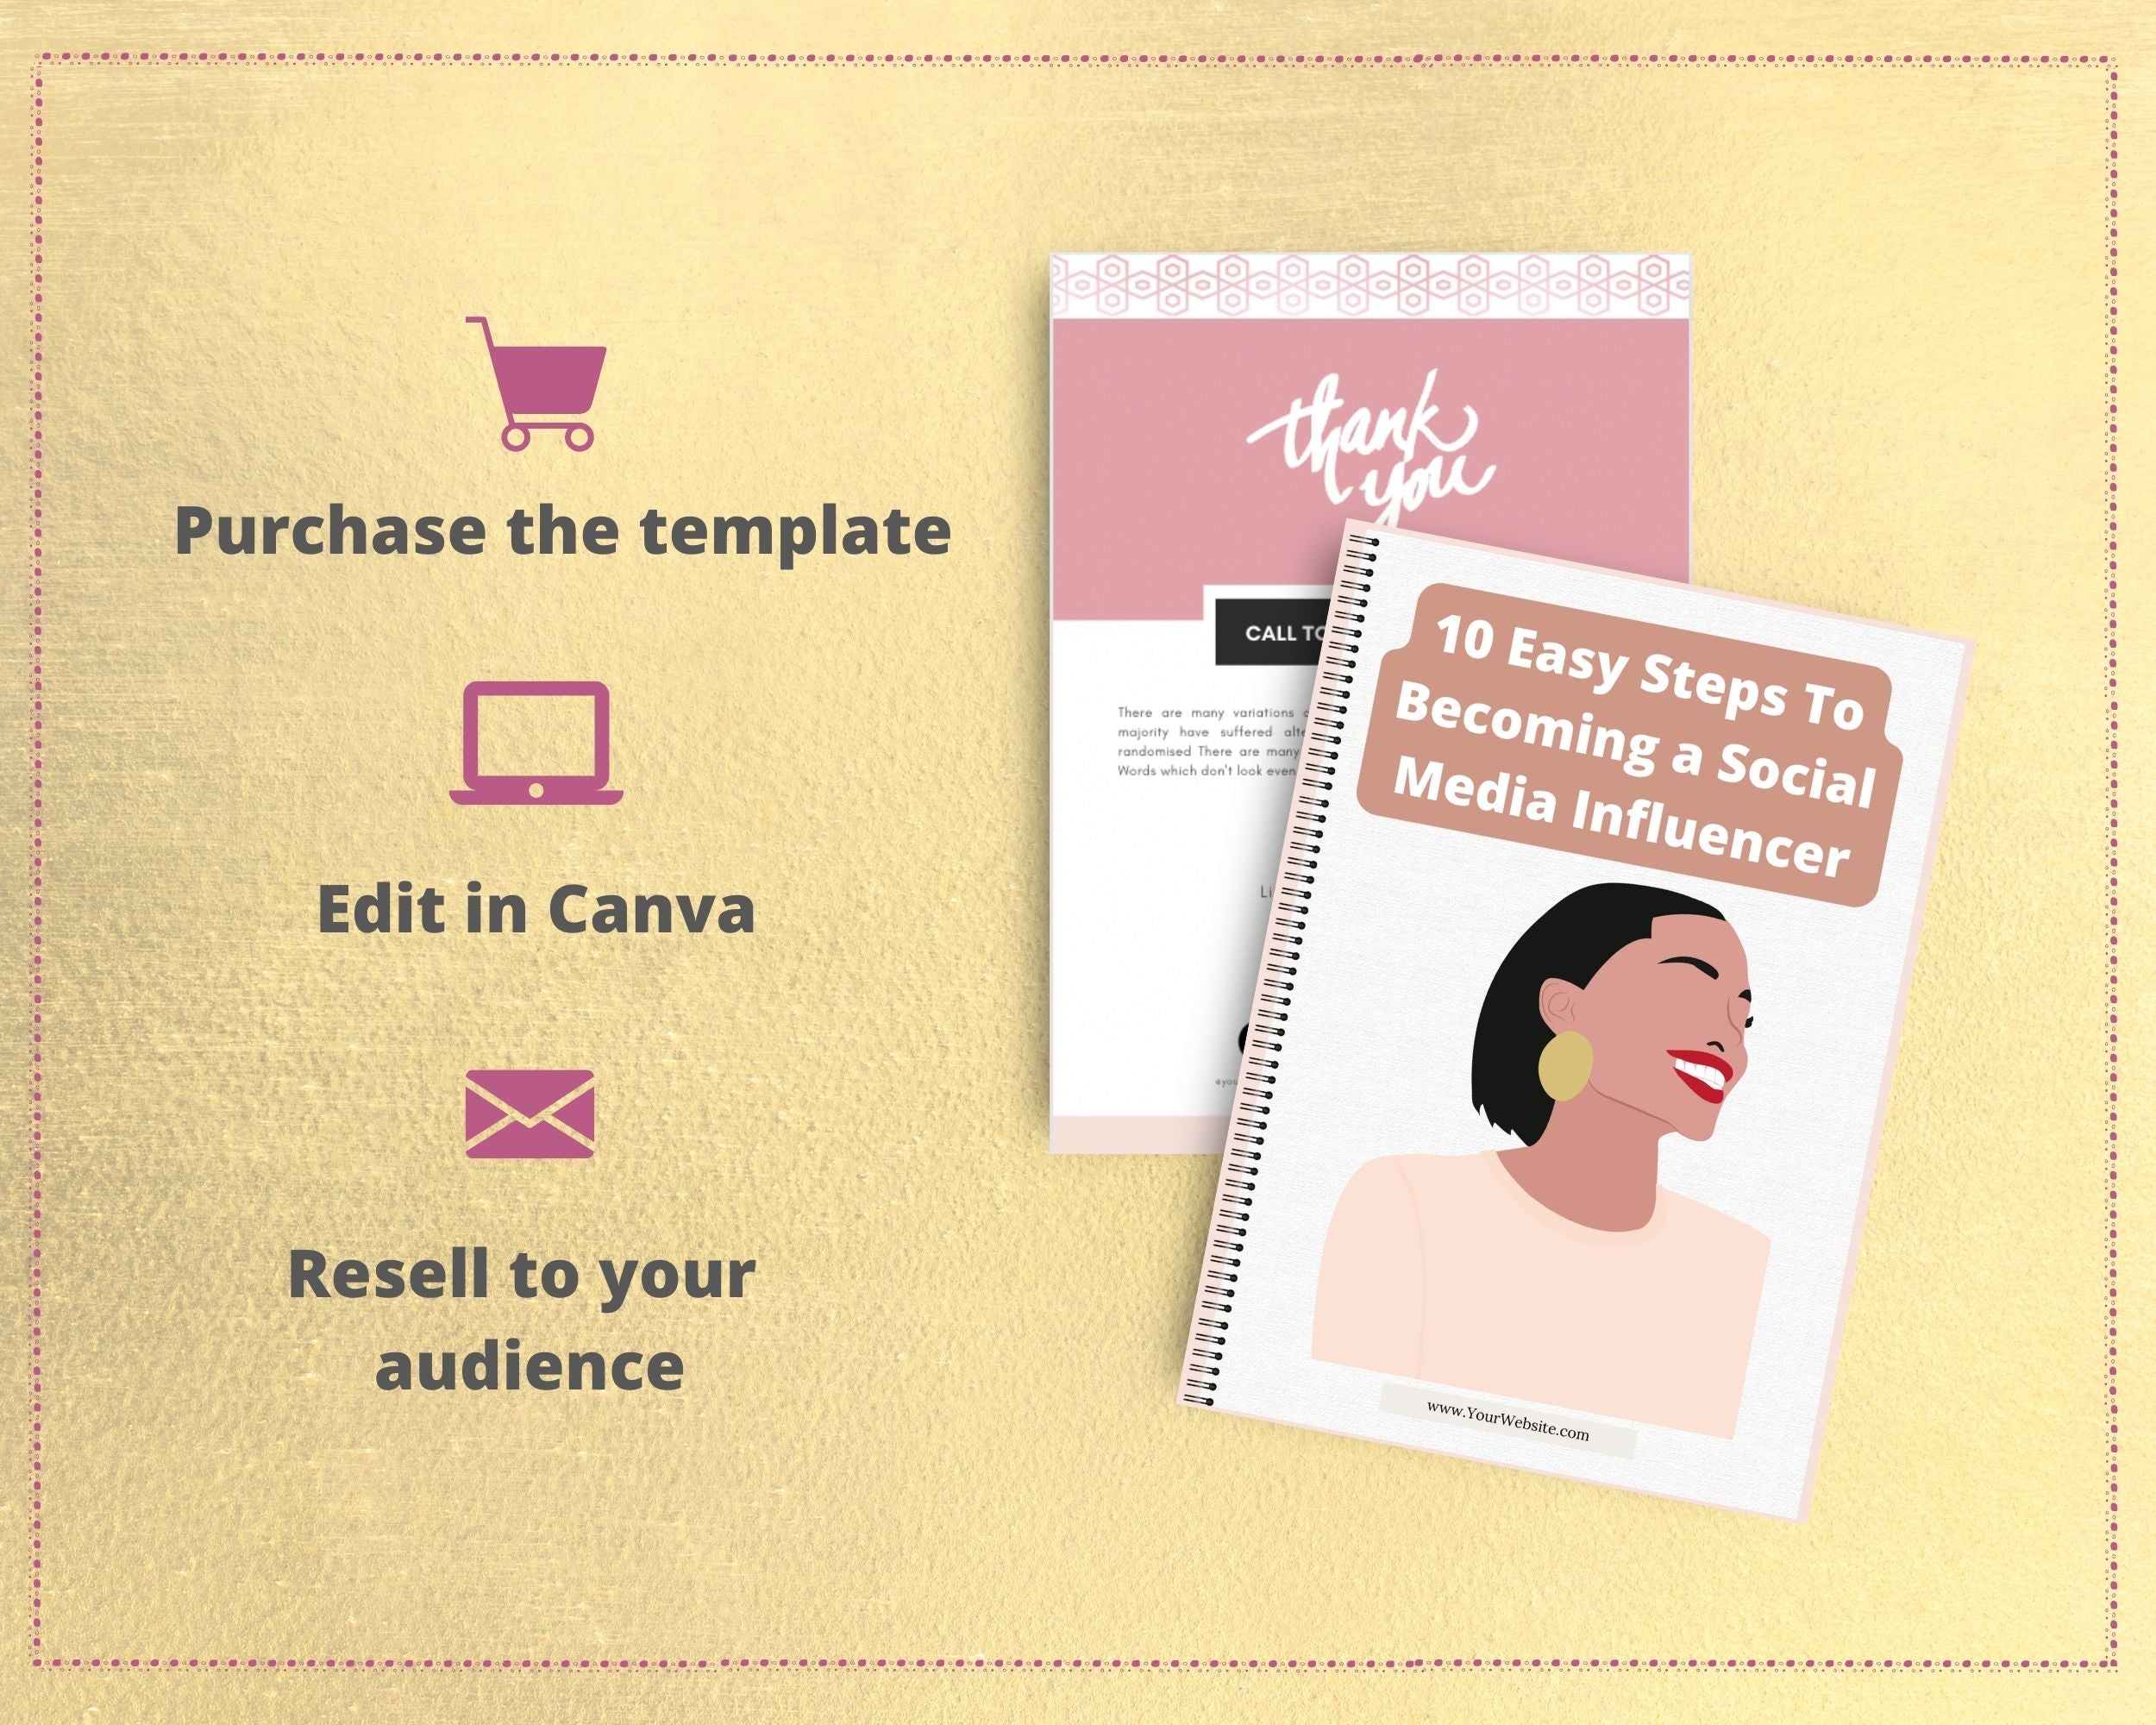 Editable 10 Easy Steps To Becoming a Social Media Influencer Ebook | Done-for-You Ebook in Canva | Rebrandable and Resizable Canva Template